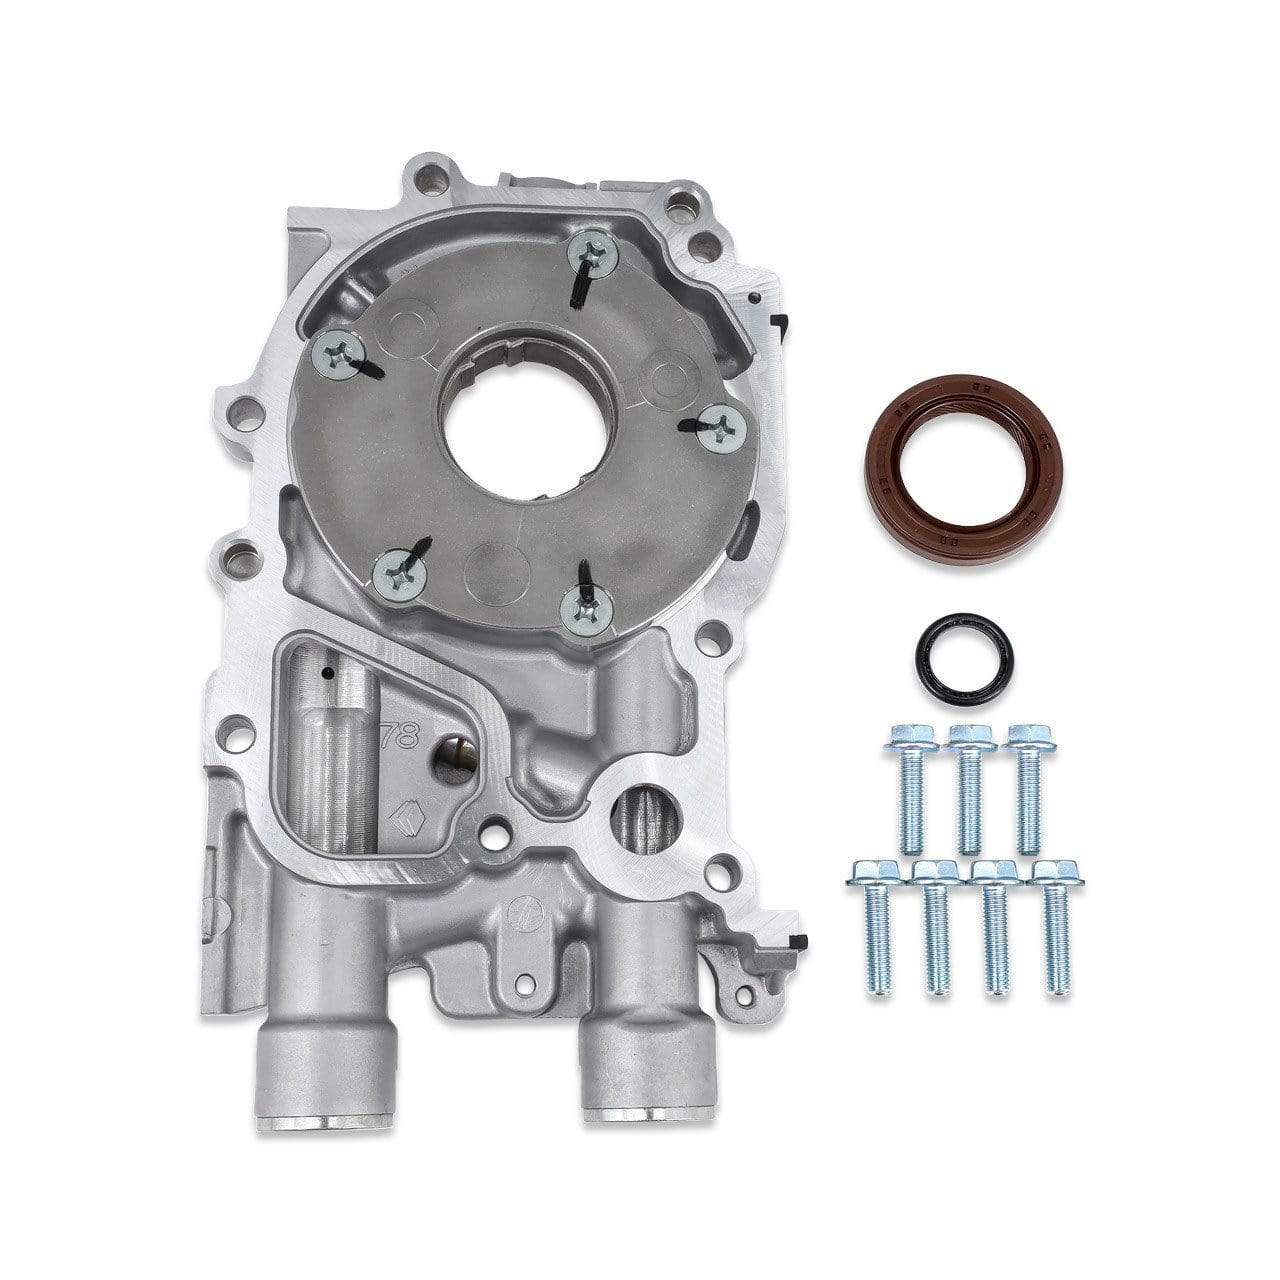 IAG Performance Stage 2 CNC Ported EJ20/EJ25 Oil Pump for 04-21 STI, 02-14 WRX, 05-12 LGT, 04-13 FXT - Dirty Racing Products